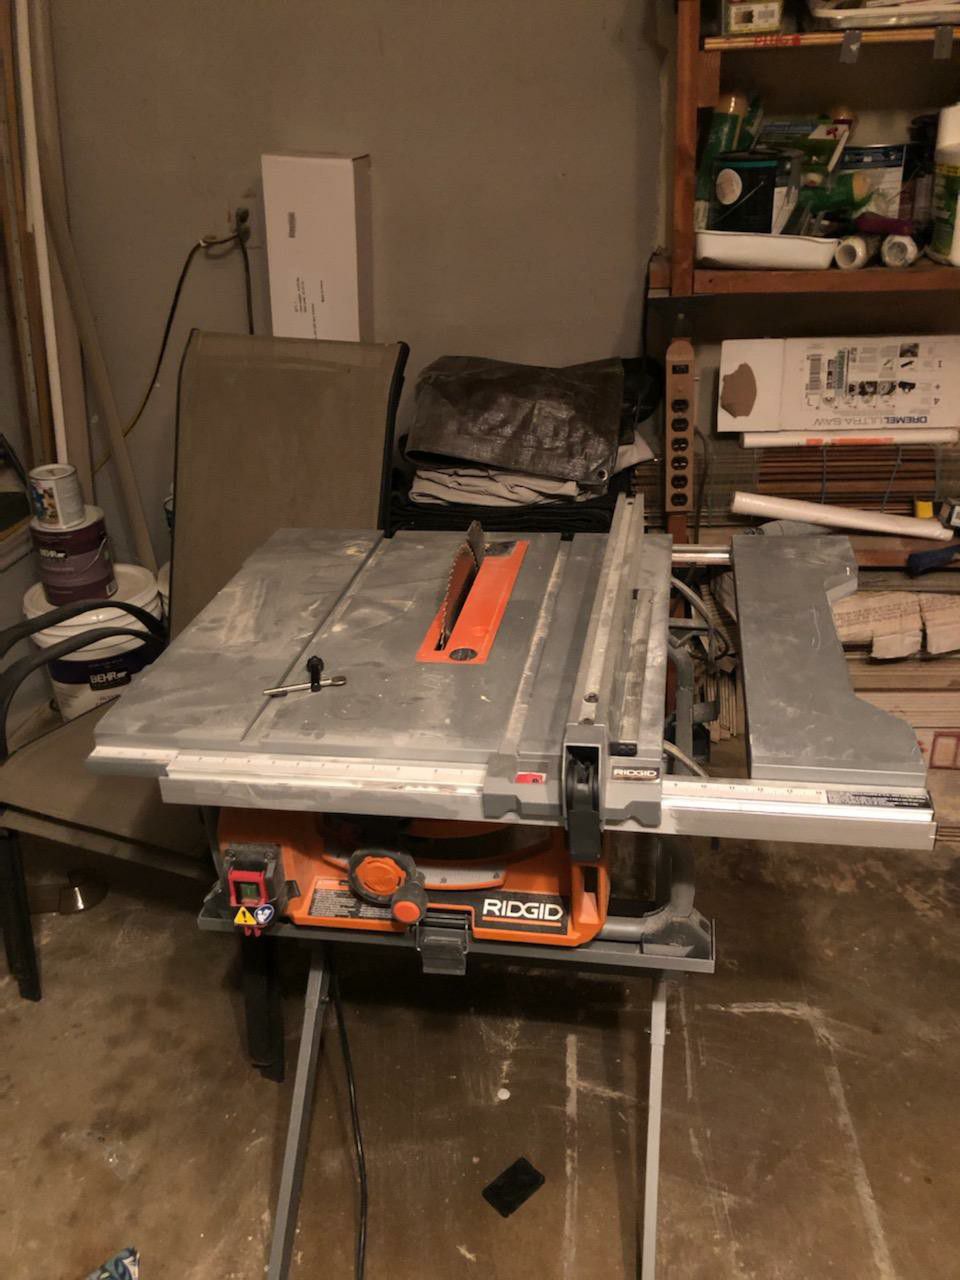 Ridgid 15 amp 10 in Table Saw with Folding table.